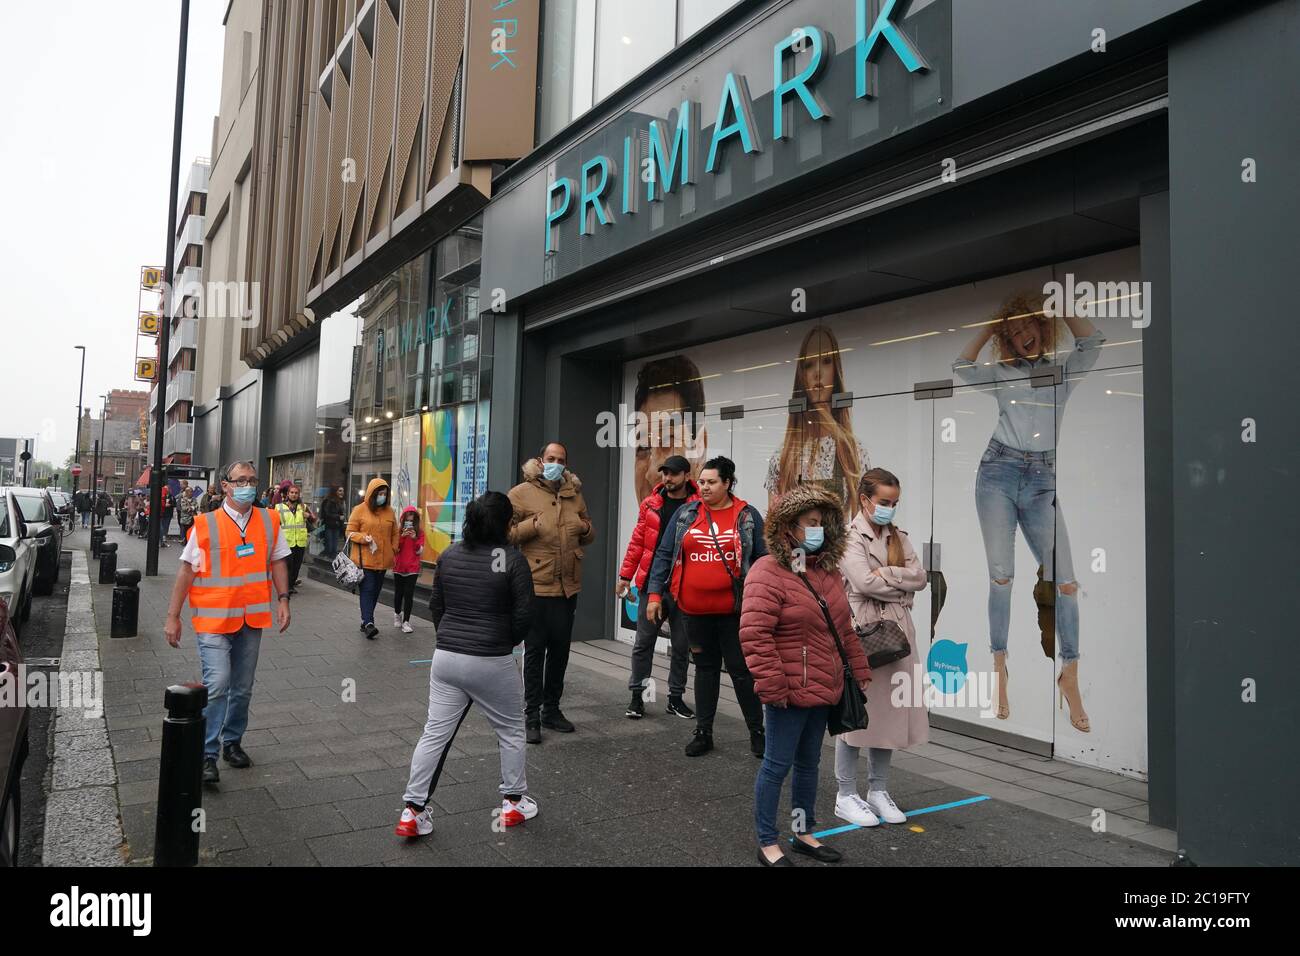 Shoppers wearing face masks in line for Primark in Newcastle as non-essential shops in England open their doors to customers for the first time since coronavirus lockdown restrictions were imposed in March. Stock Photo